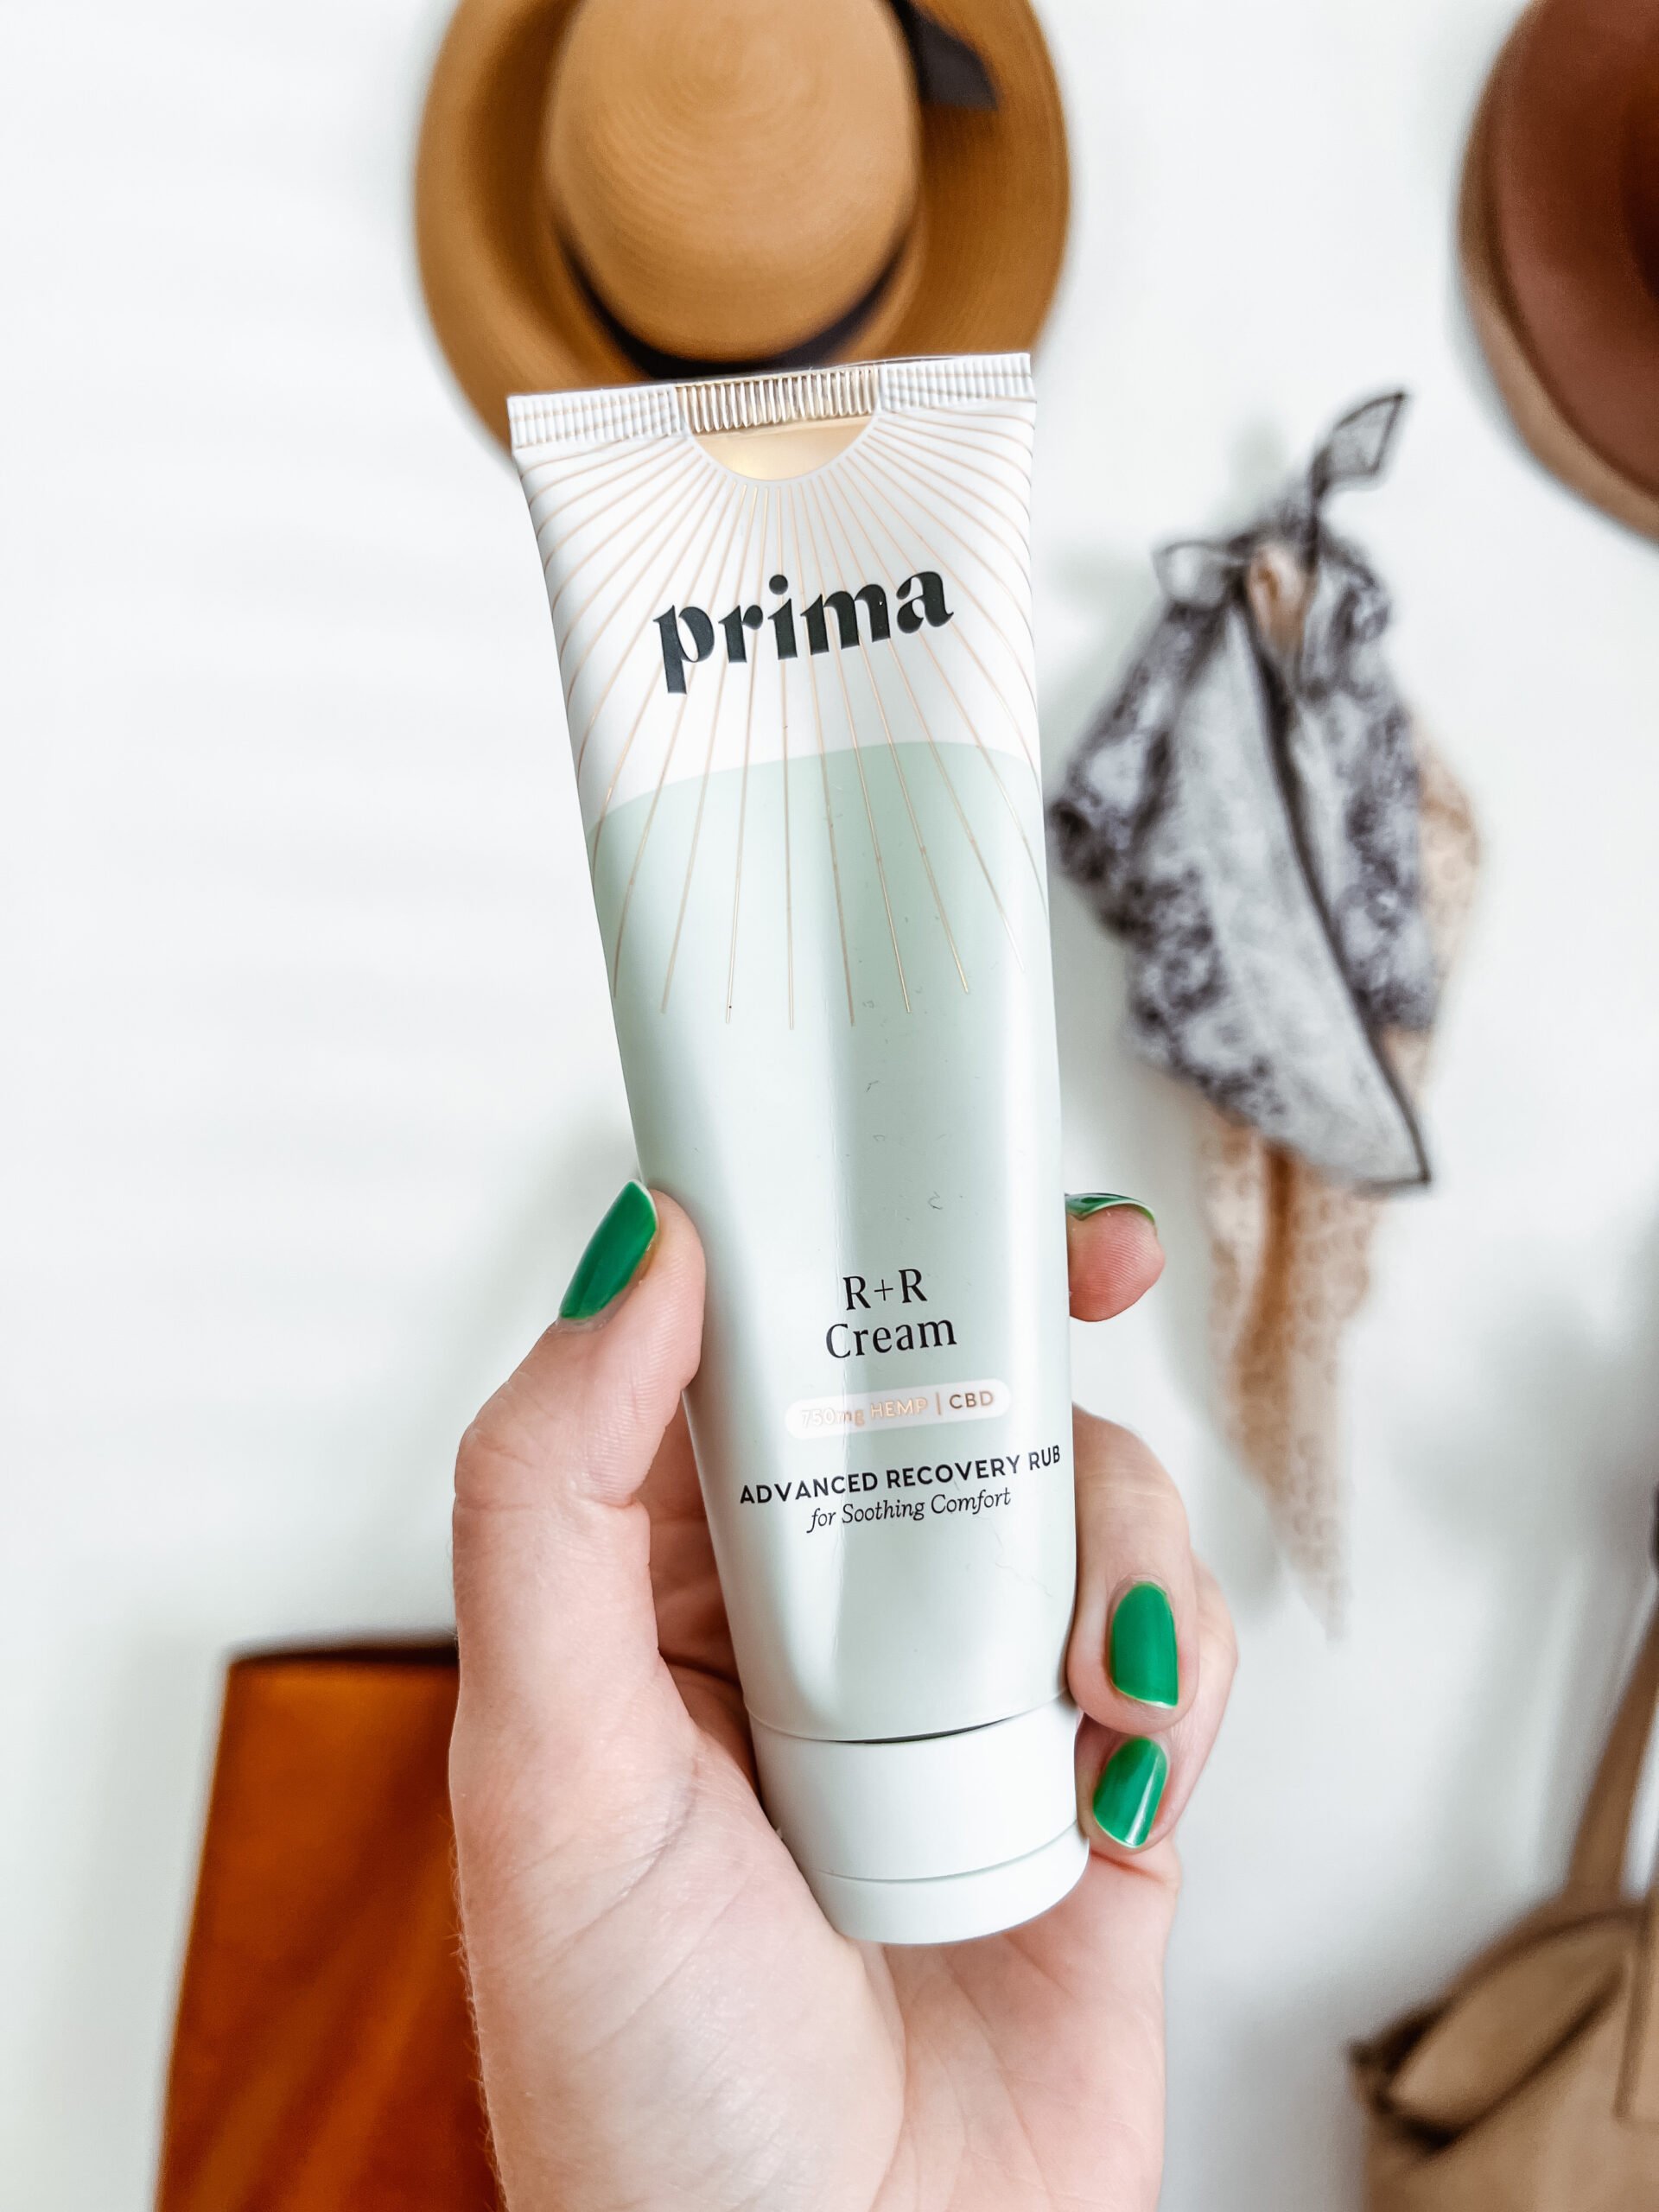 a hand holds up a tube of Prima's R+R cream